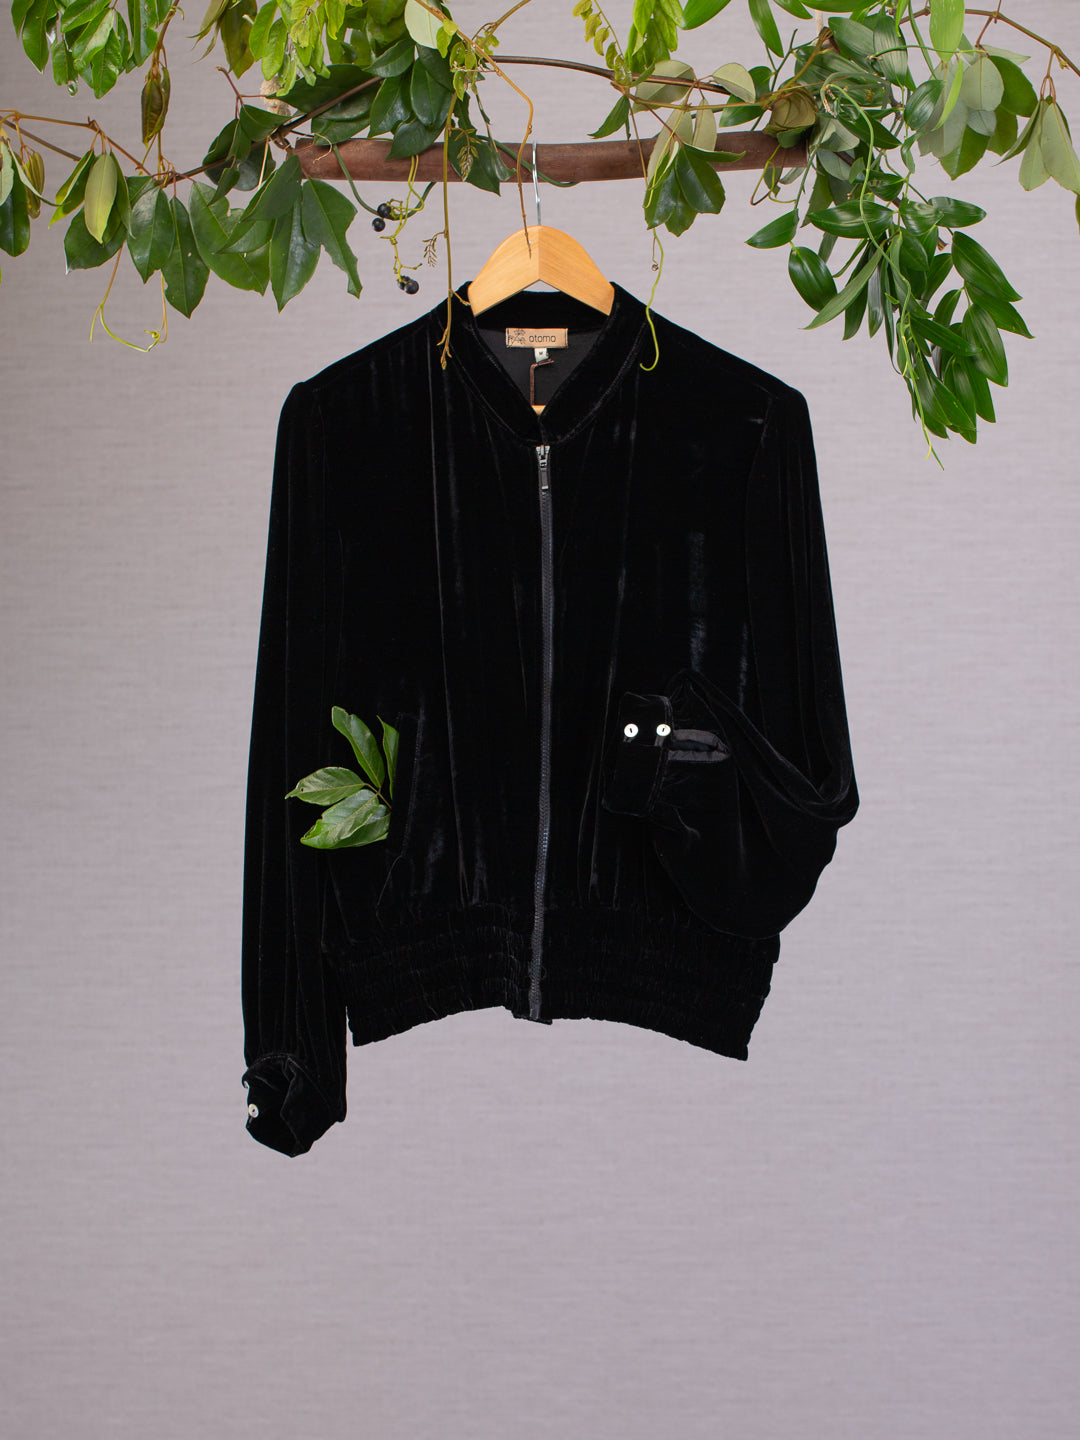 Black silk velvet jacket hanging from vines with a leaf in the pocket, featuring cuff with shell buttons.